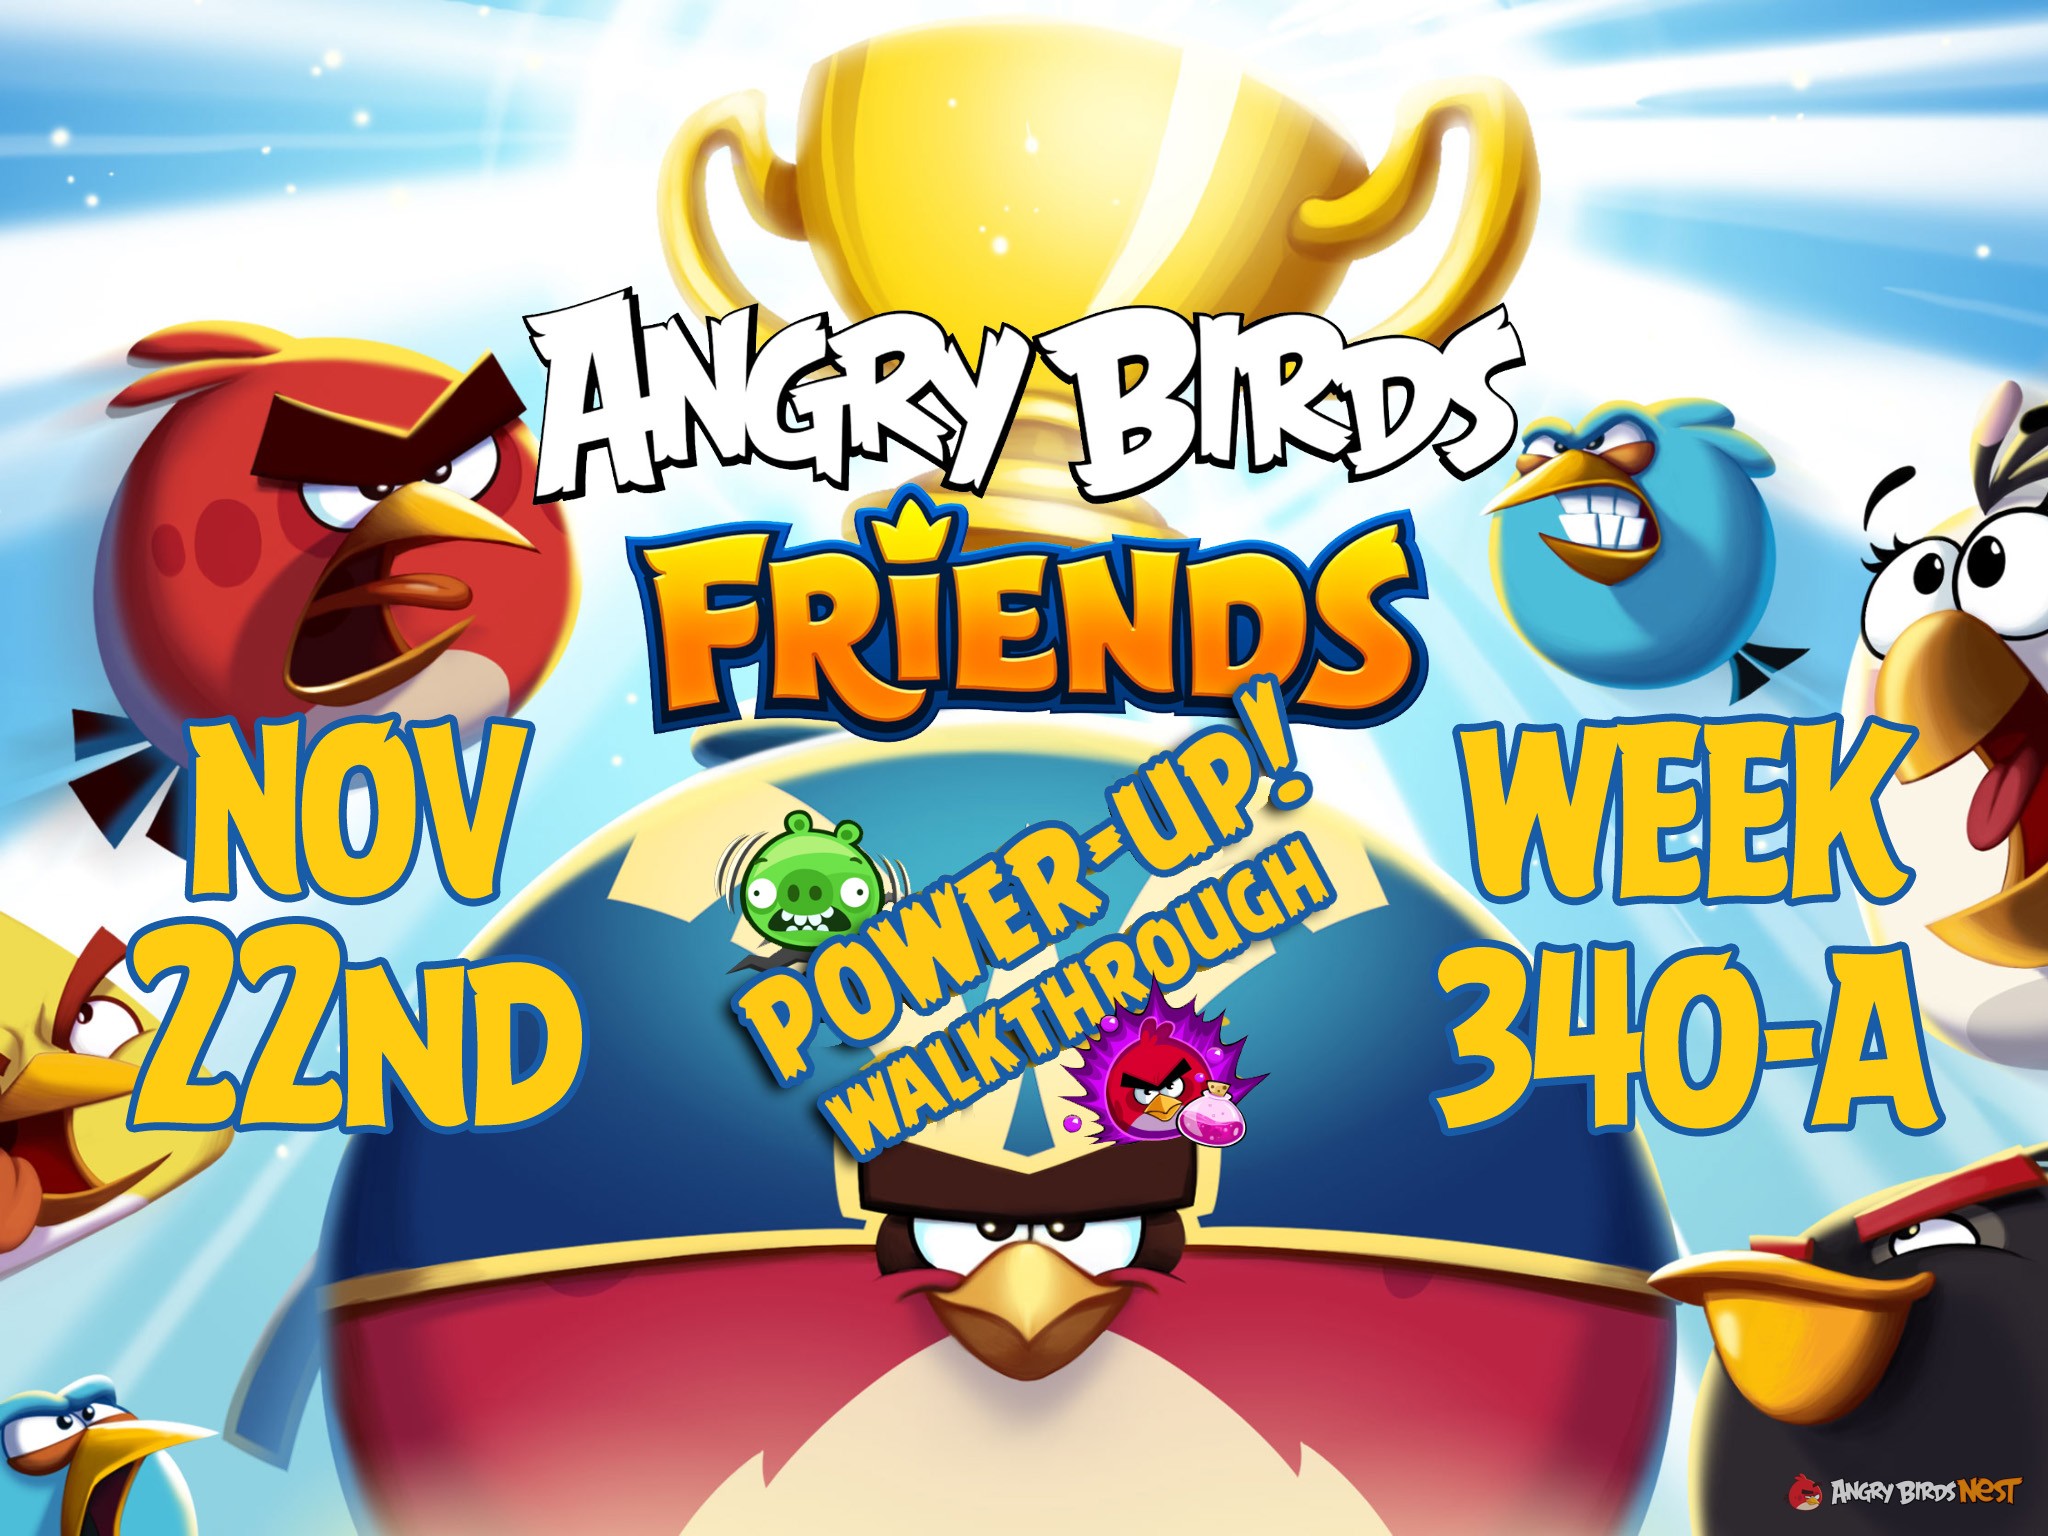 Angry-Birds-Friends-Tournament-Week-340-A-Feature-Image-PU